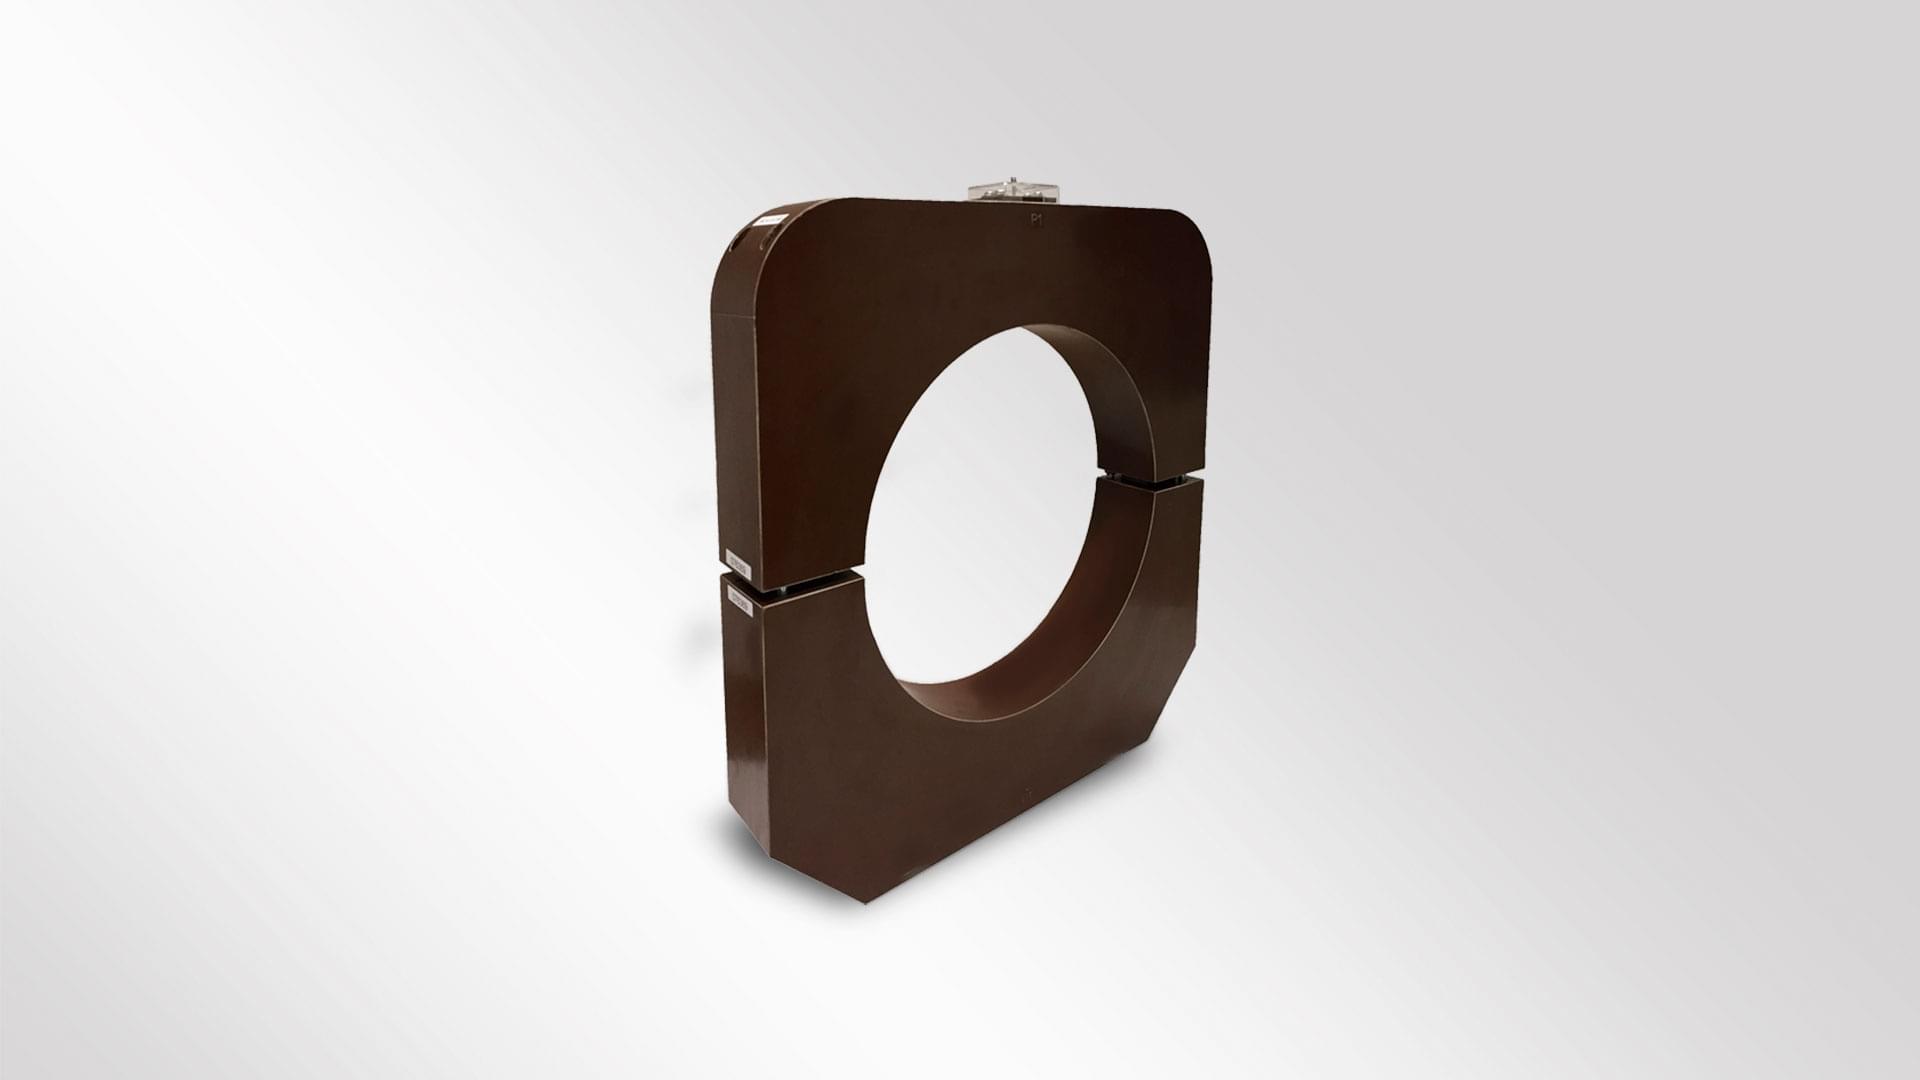 A brown toroidal current transformer which is suitable for both metering and protection purposes